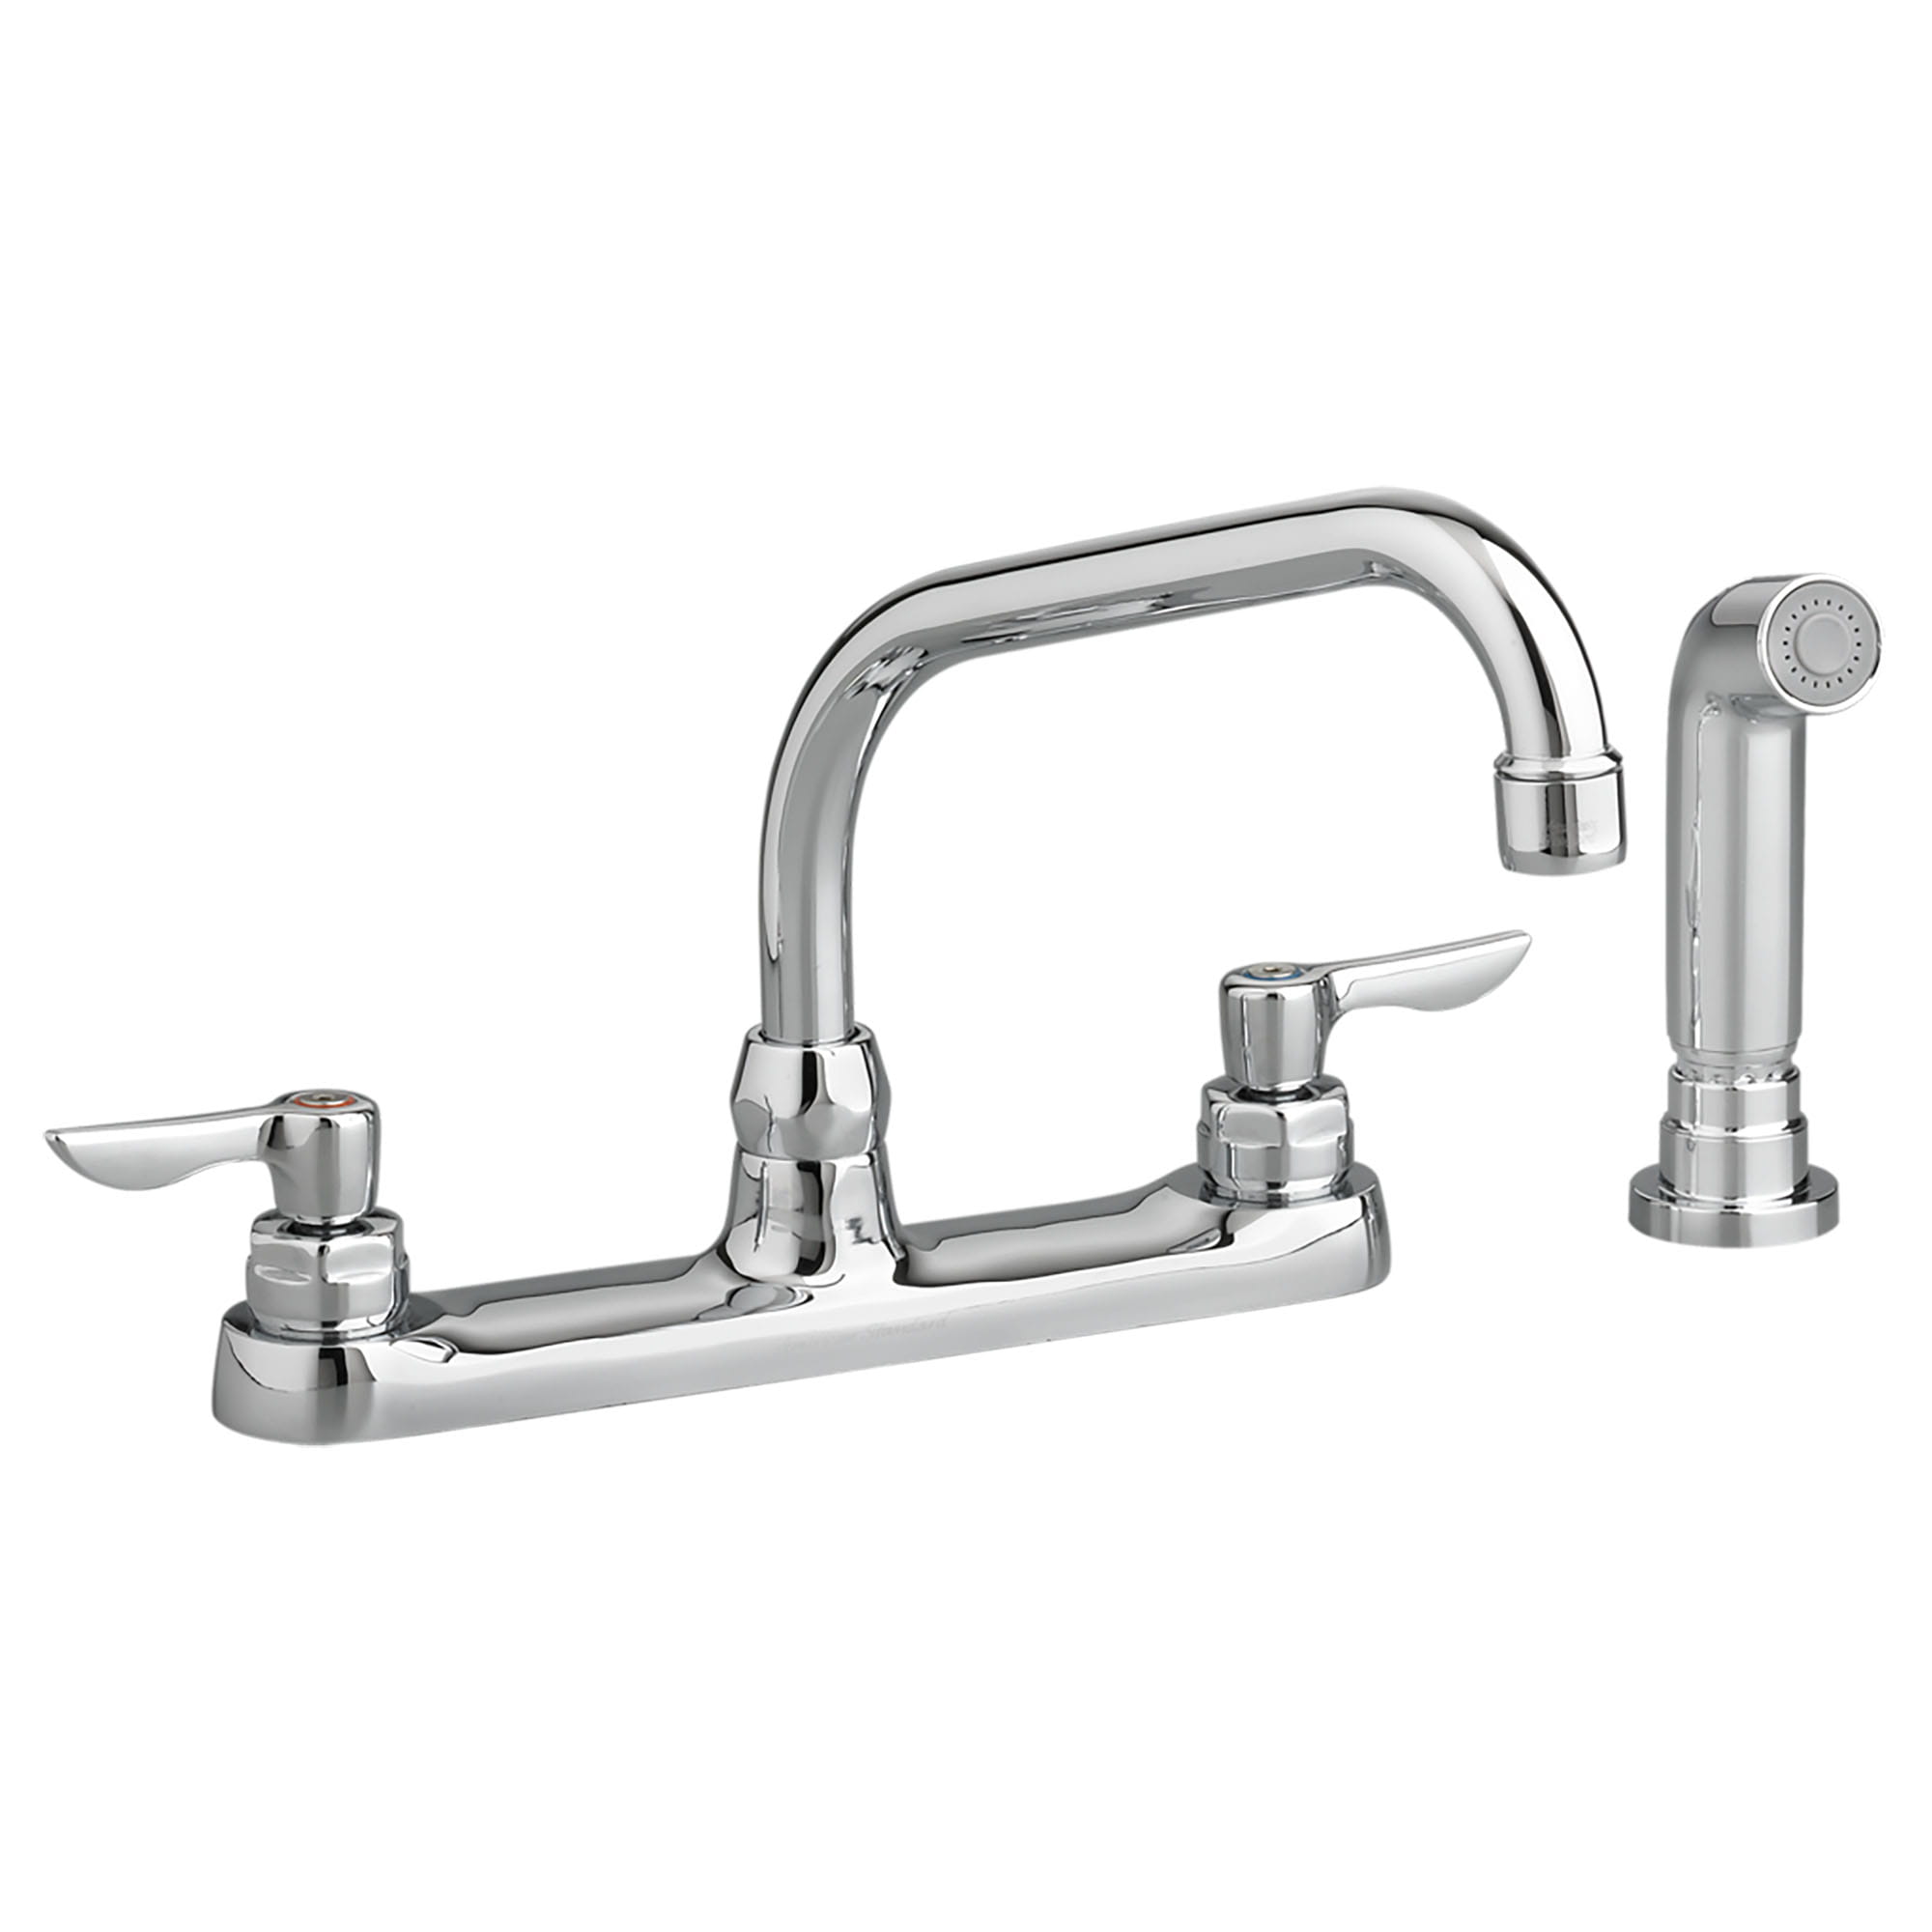 Monterrey® Top Mount Kitchen Faucet With Tubular Spout and Lever Handles 1.5 gpm/5.7 Lpf Less Spray